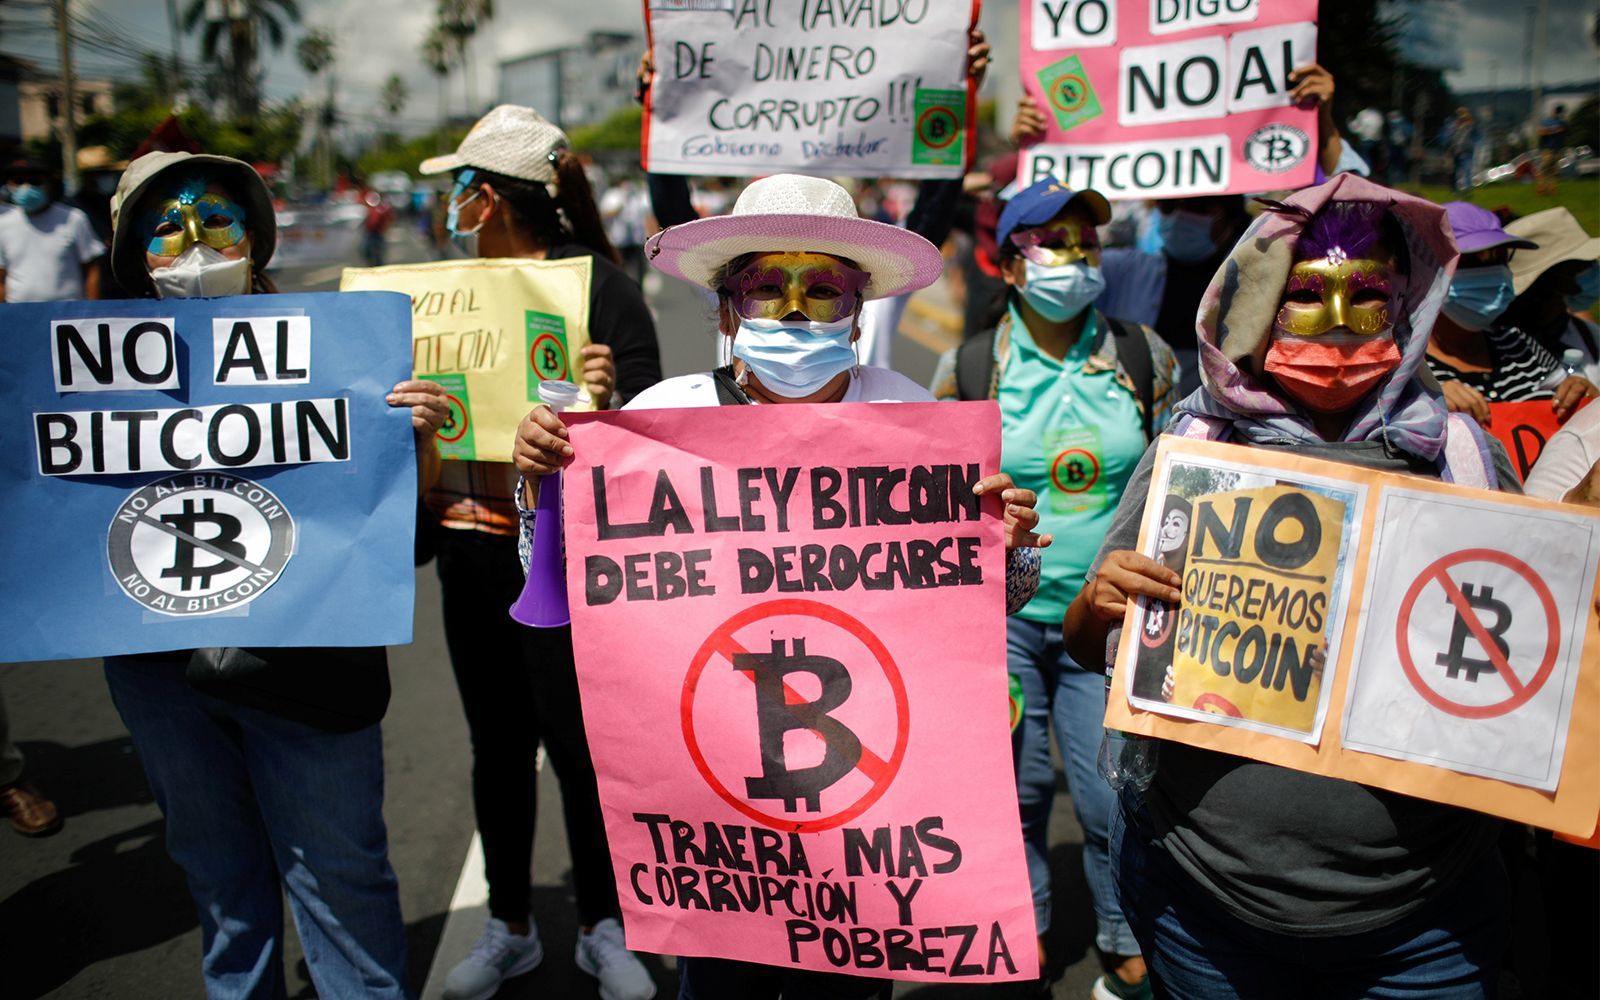 Can bitcoin become a national currency? Since yesterday El Salvador has become the first country in the world to accept bitcoin as a currency, but it did not go as hoped